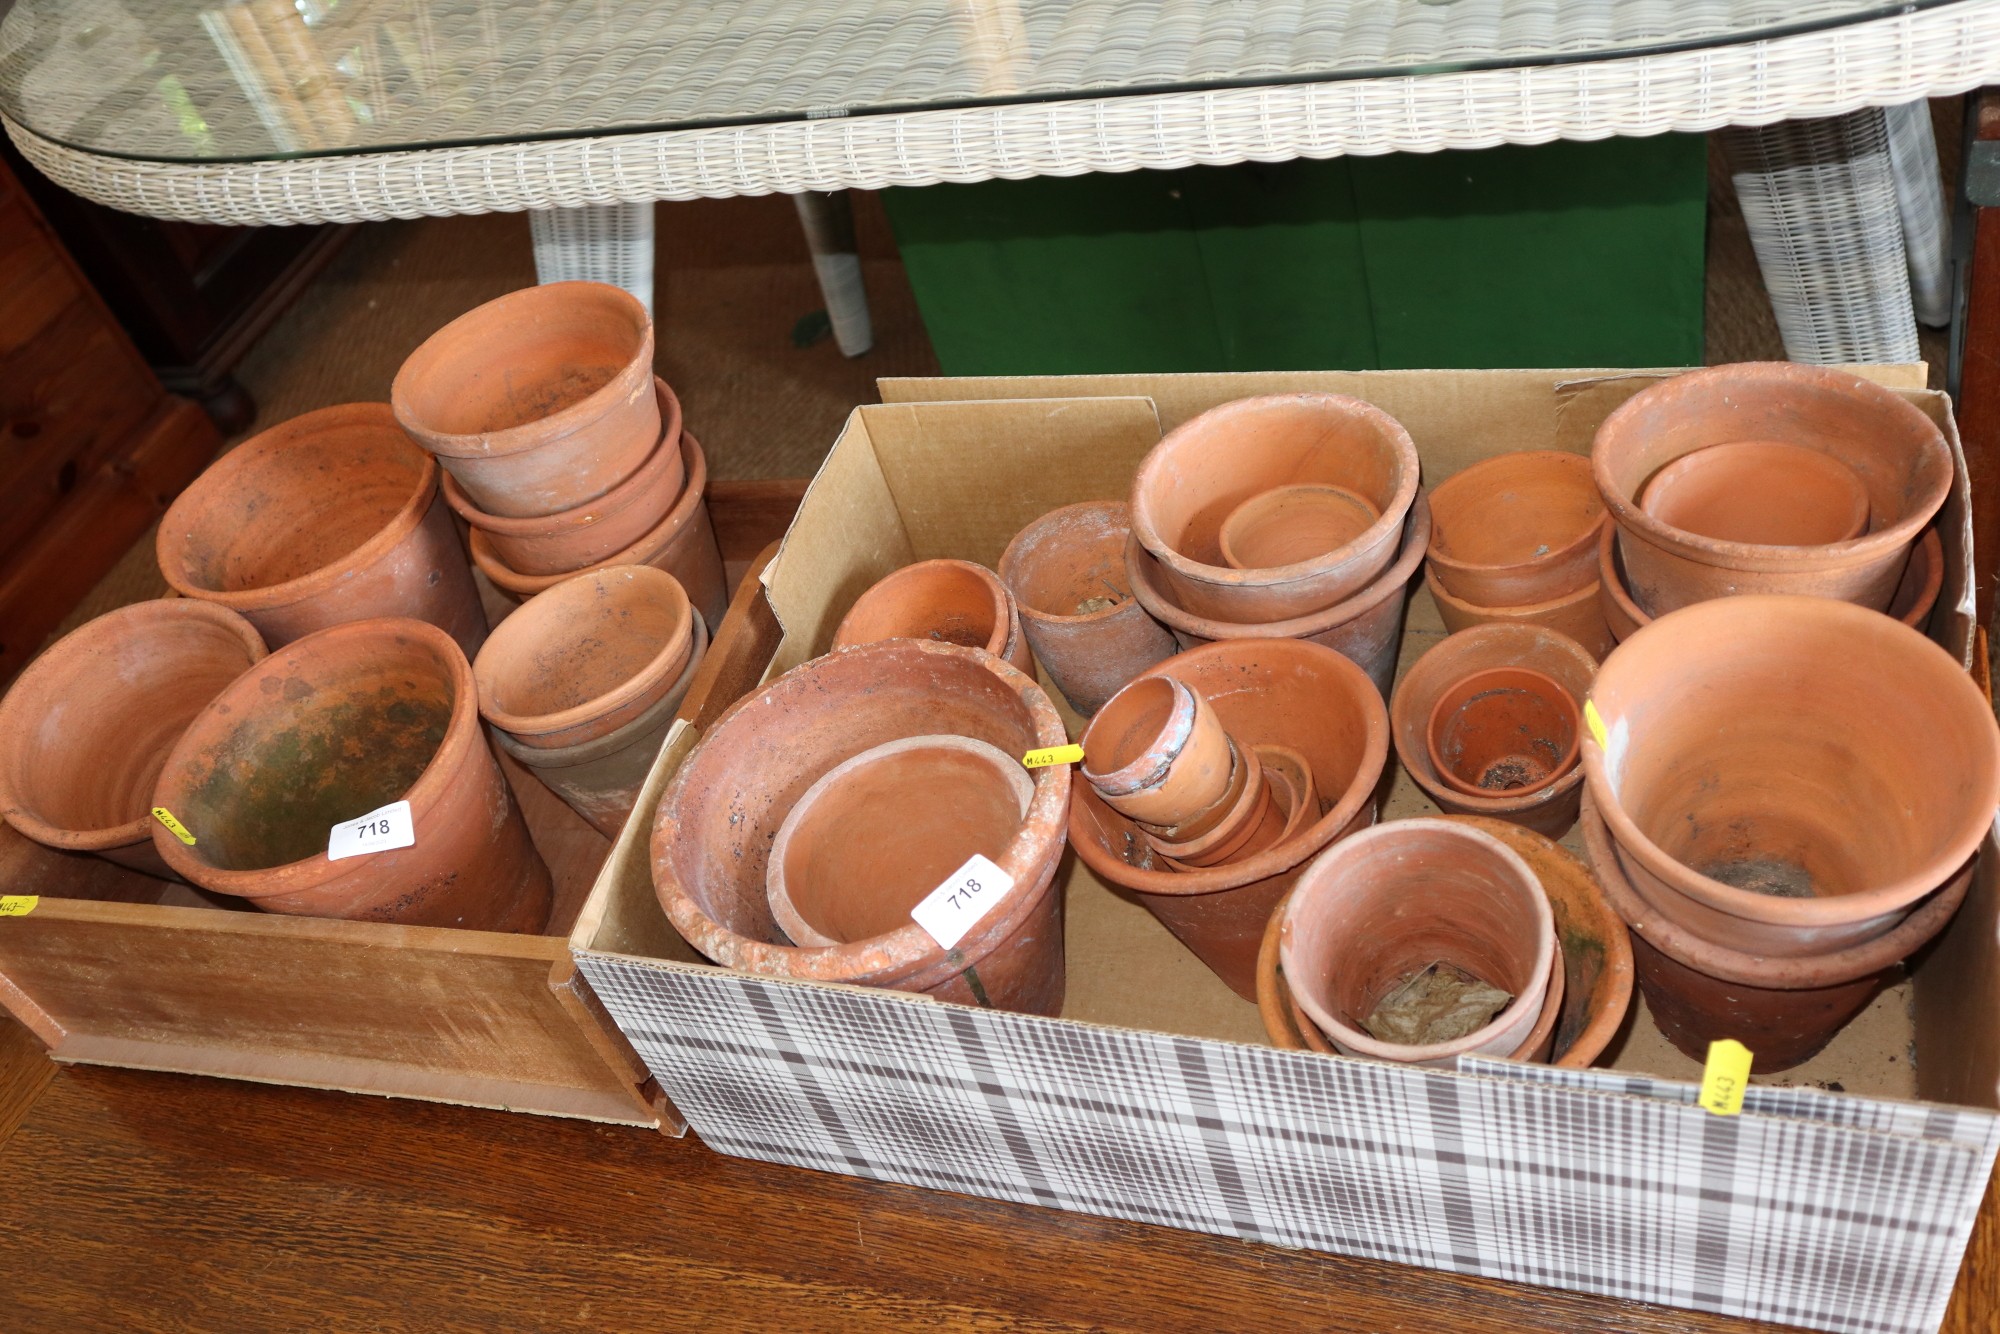 An assortment of 19th century and later terracotta pots, various sizes ranging from 2" high to 6 1/